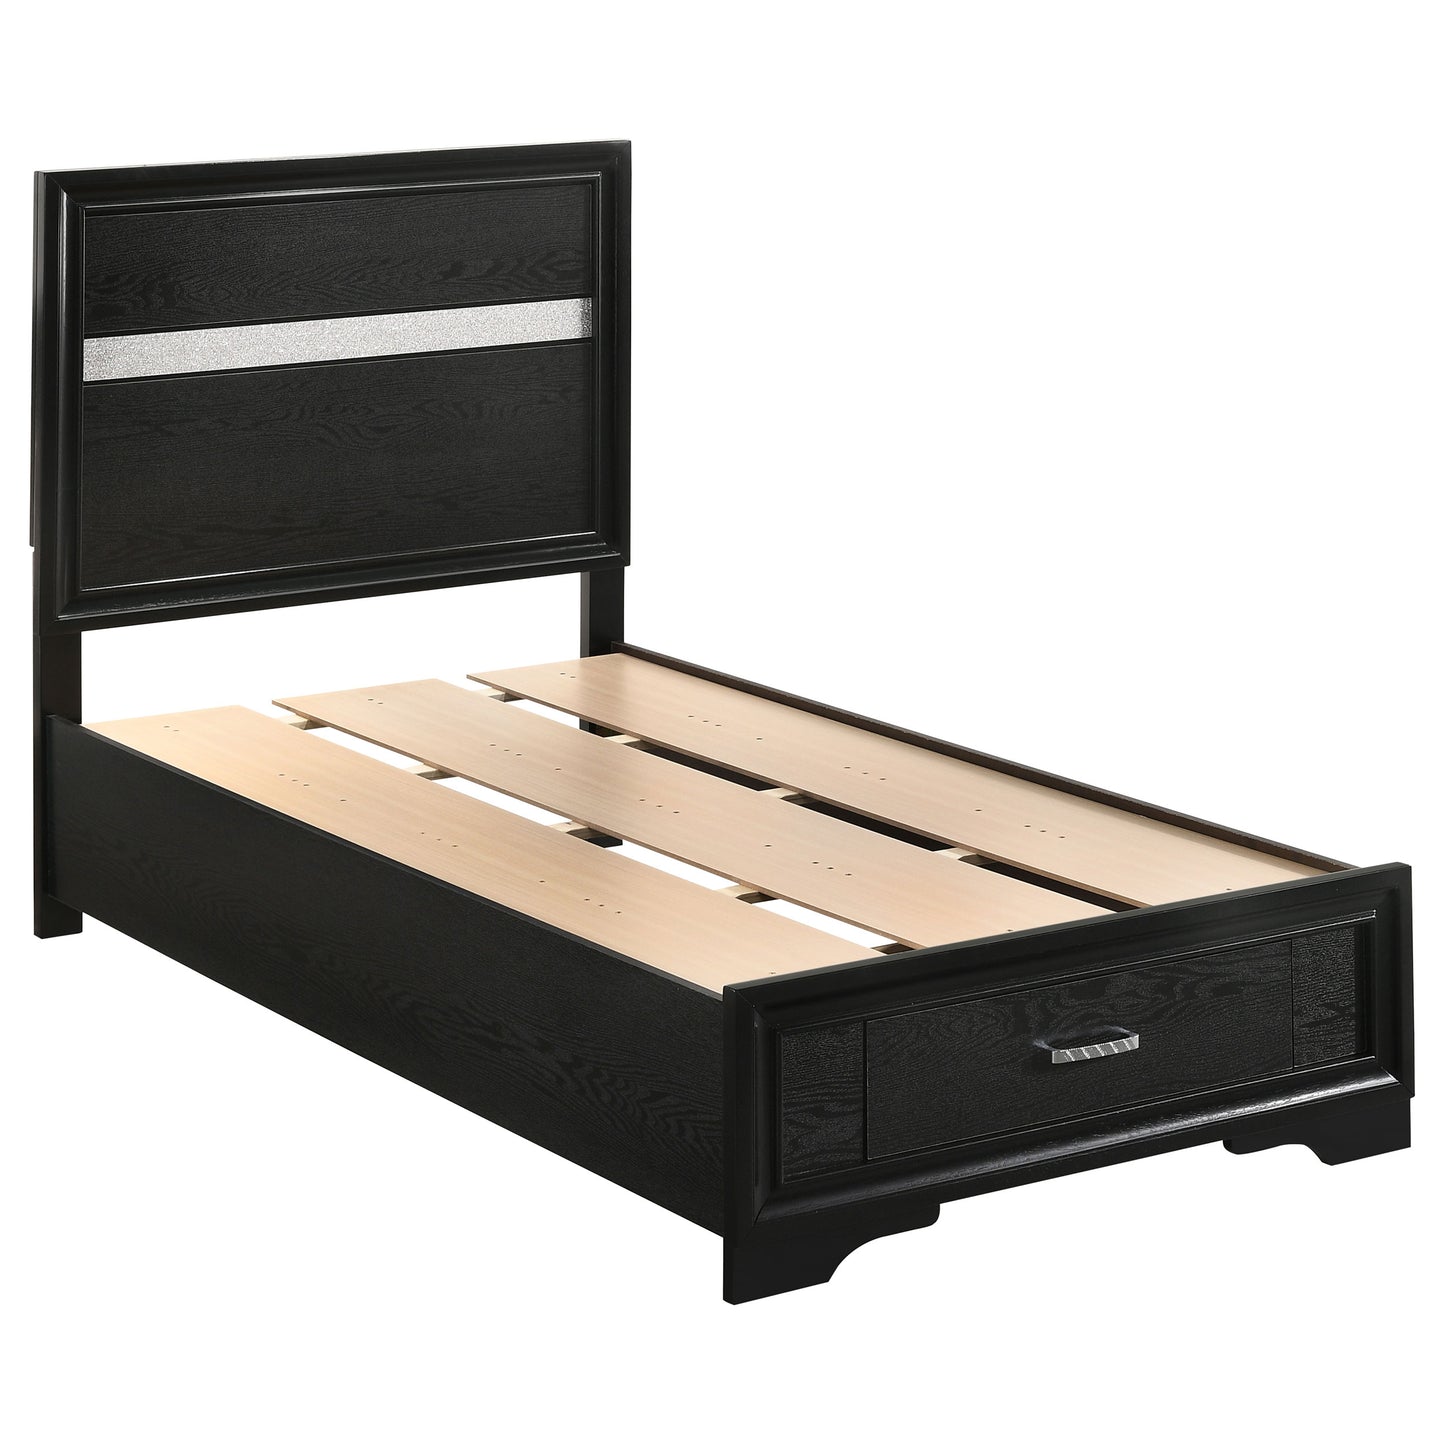 twin bed 3 pc set